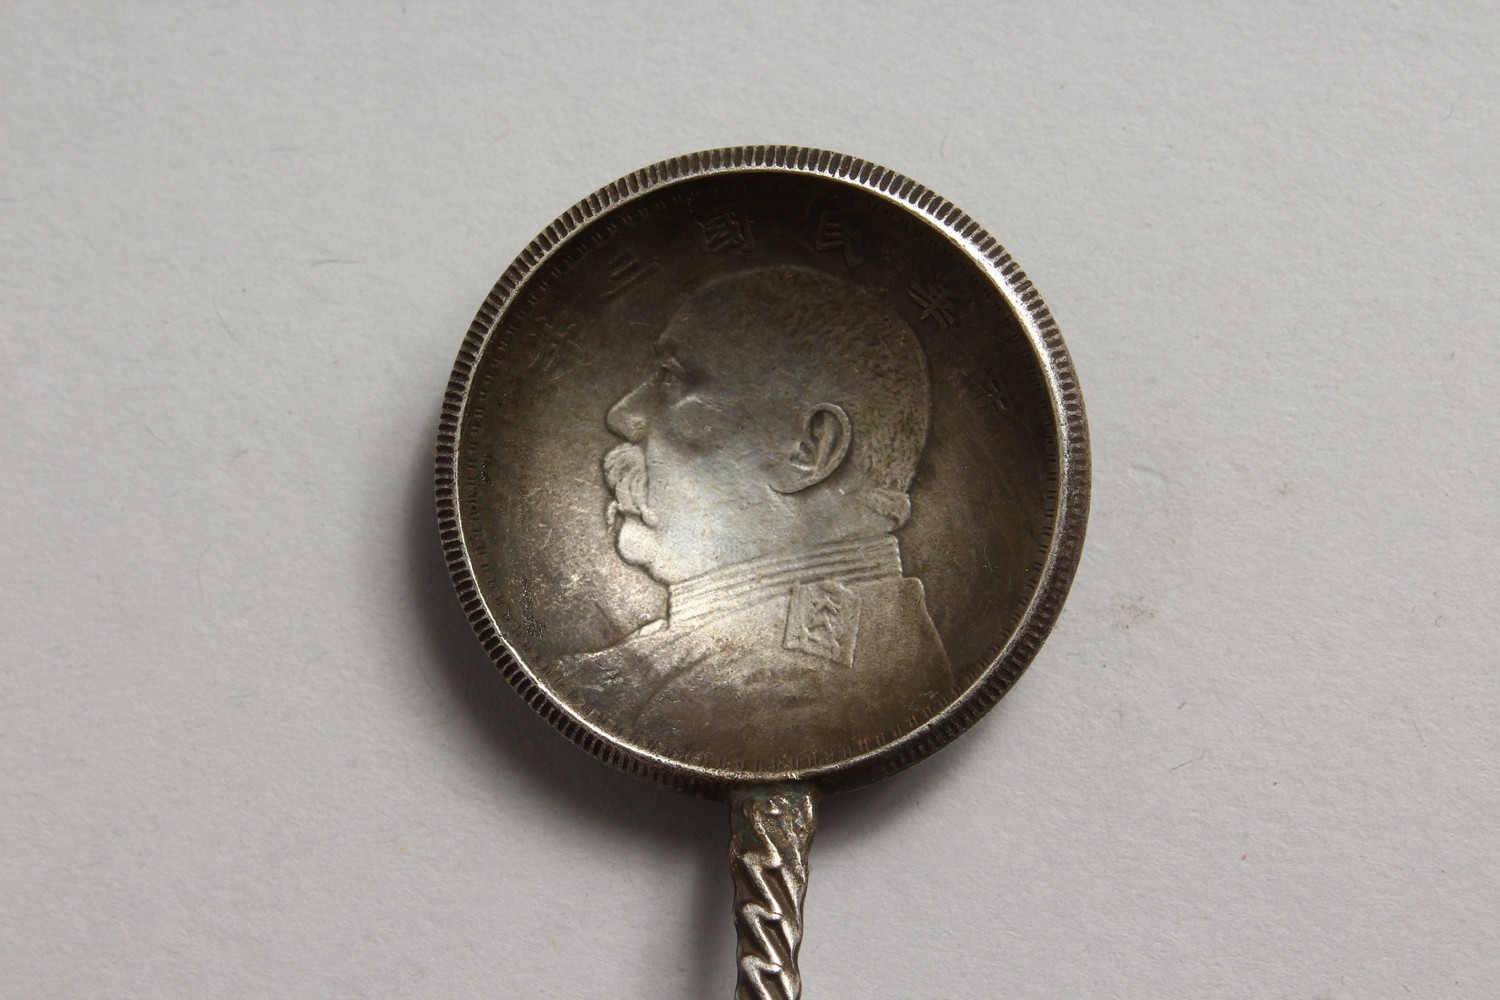 A GOOD CHINESE SILVER LADLE SPOON FORMED FROM CURRENCY, The bowl of the spoon formed from a - Image 3 of 6